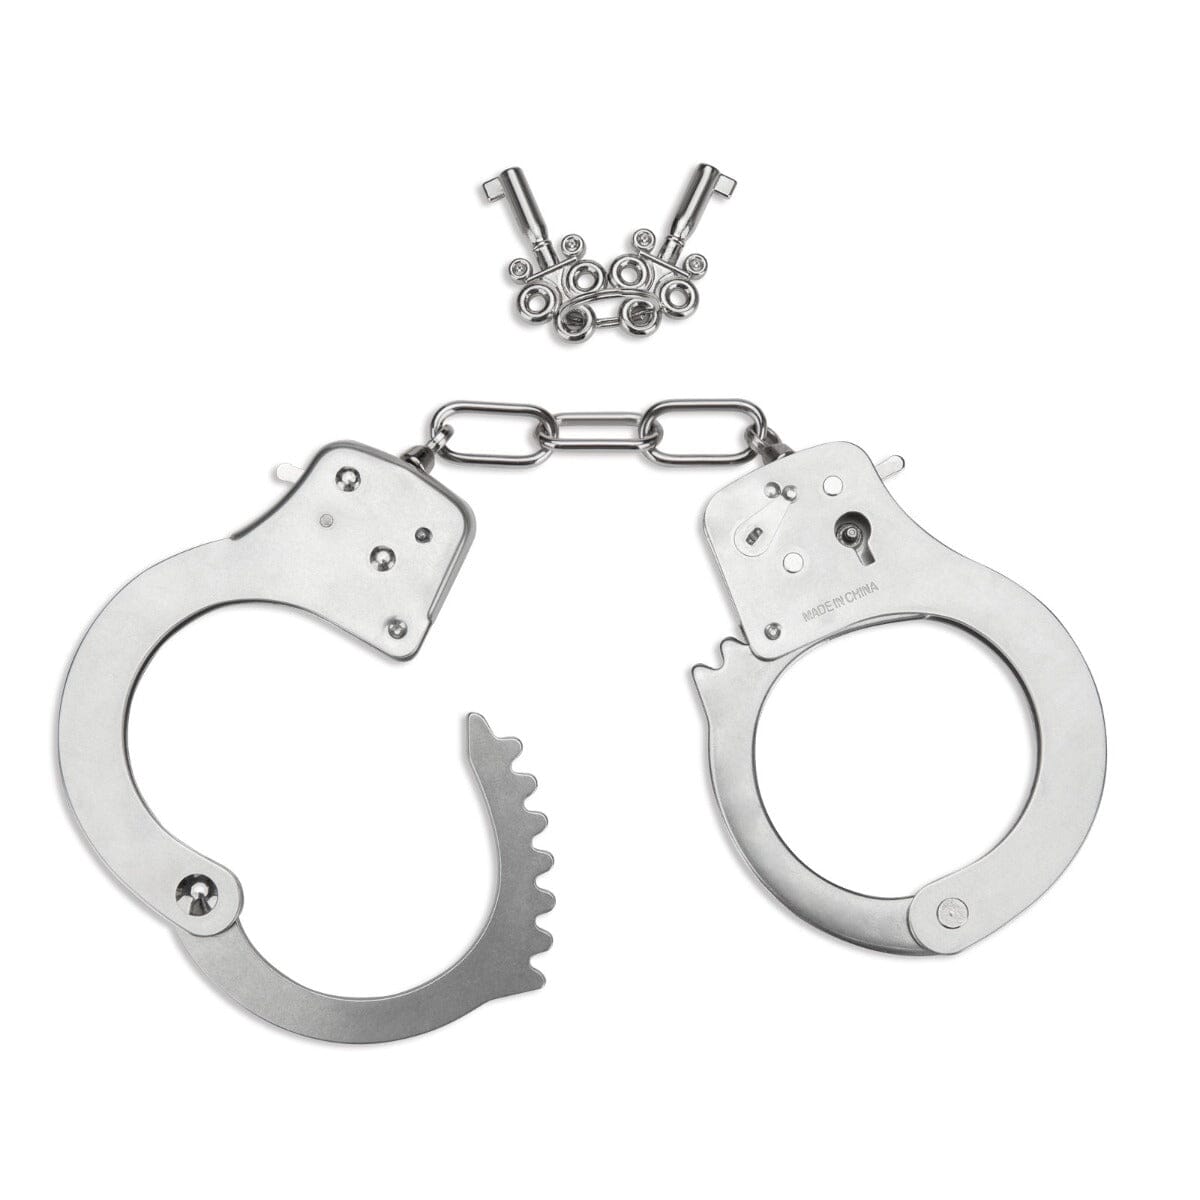 a pair of handcuffs with a chain attached to it